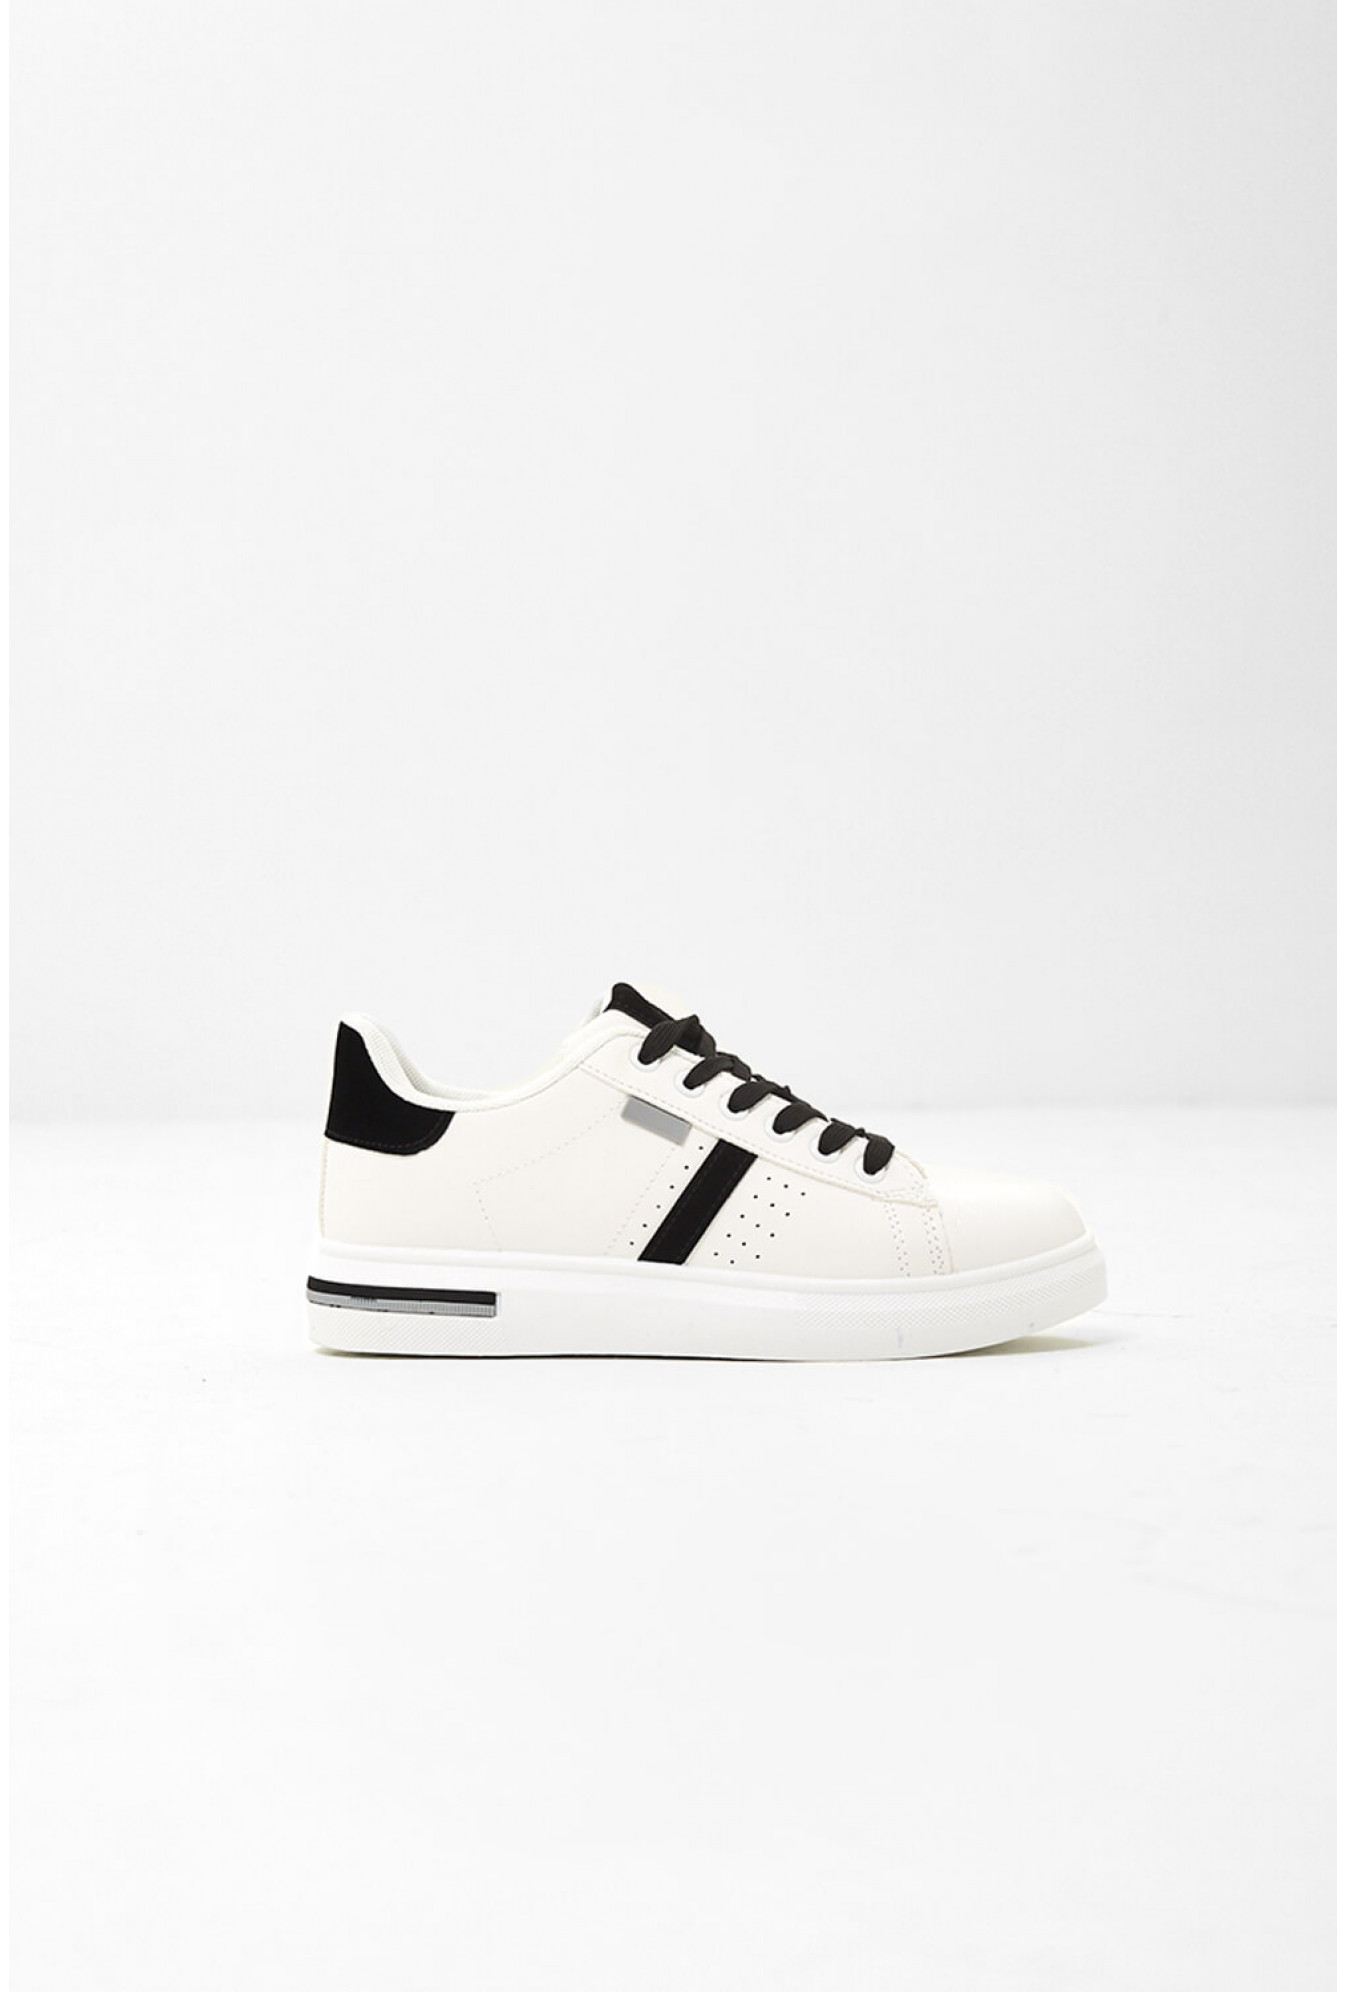 Cali Lace Up Trainers in White and Black